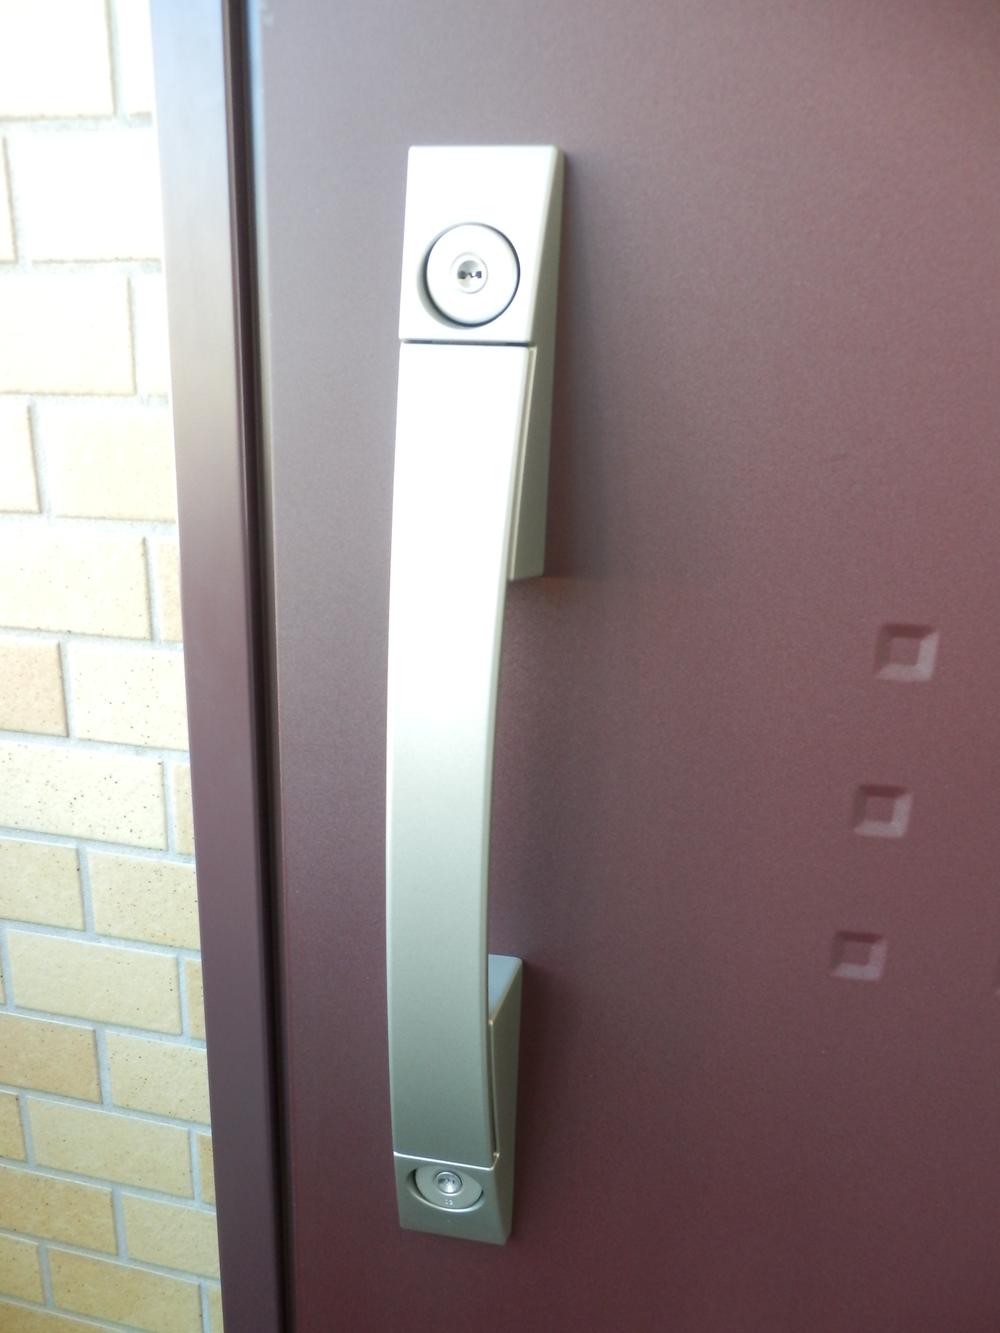 Entrance. Local (12 May 2013) Shooting. The entrance door, It has been replaced with a dimple key double lock.